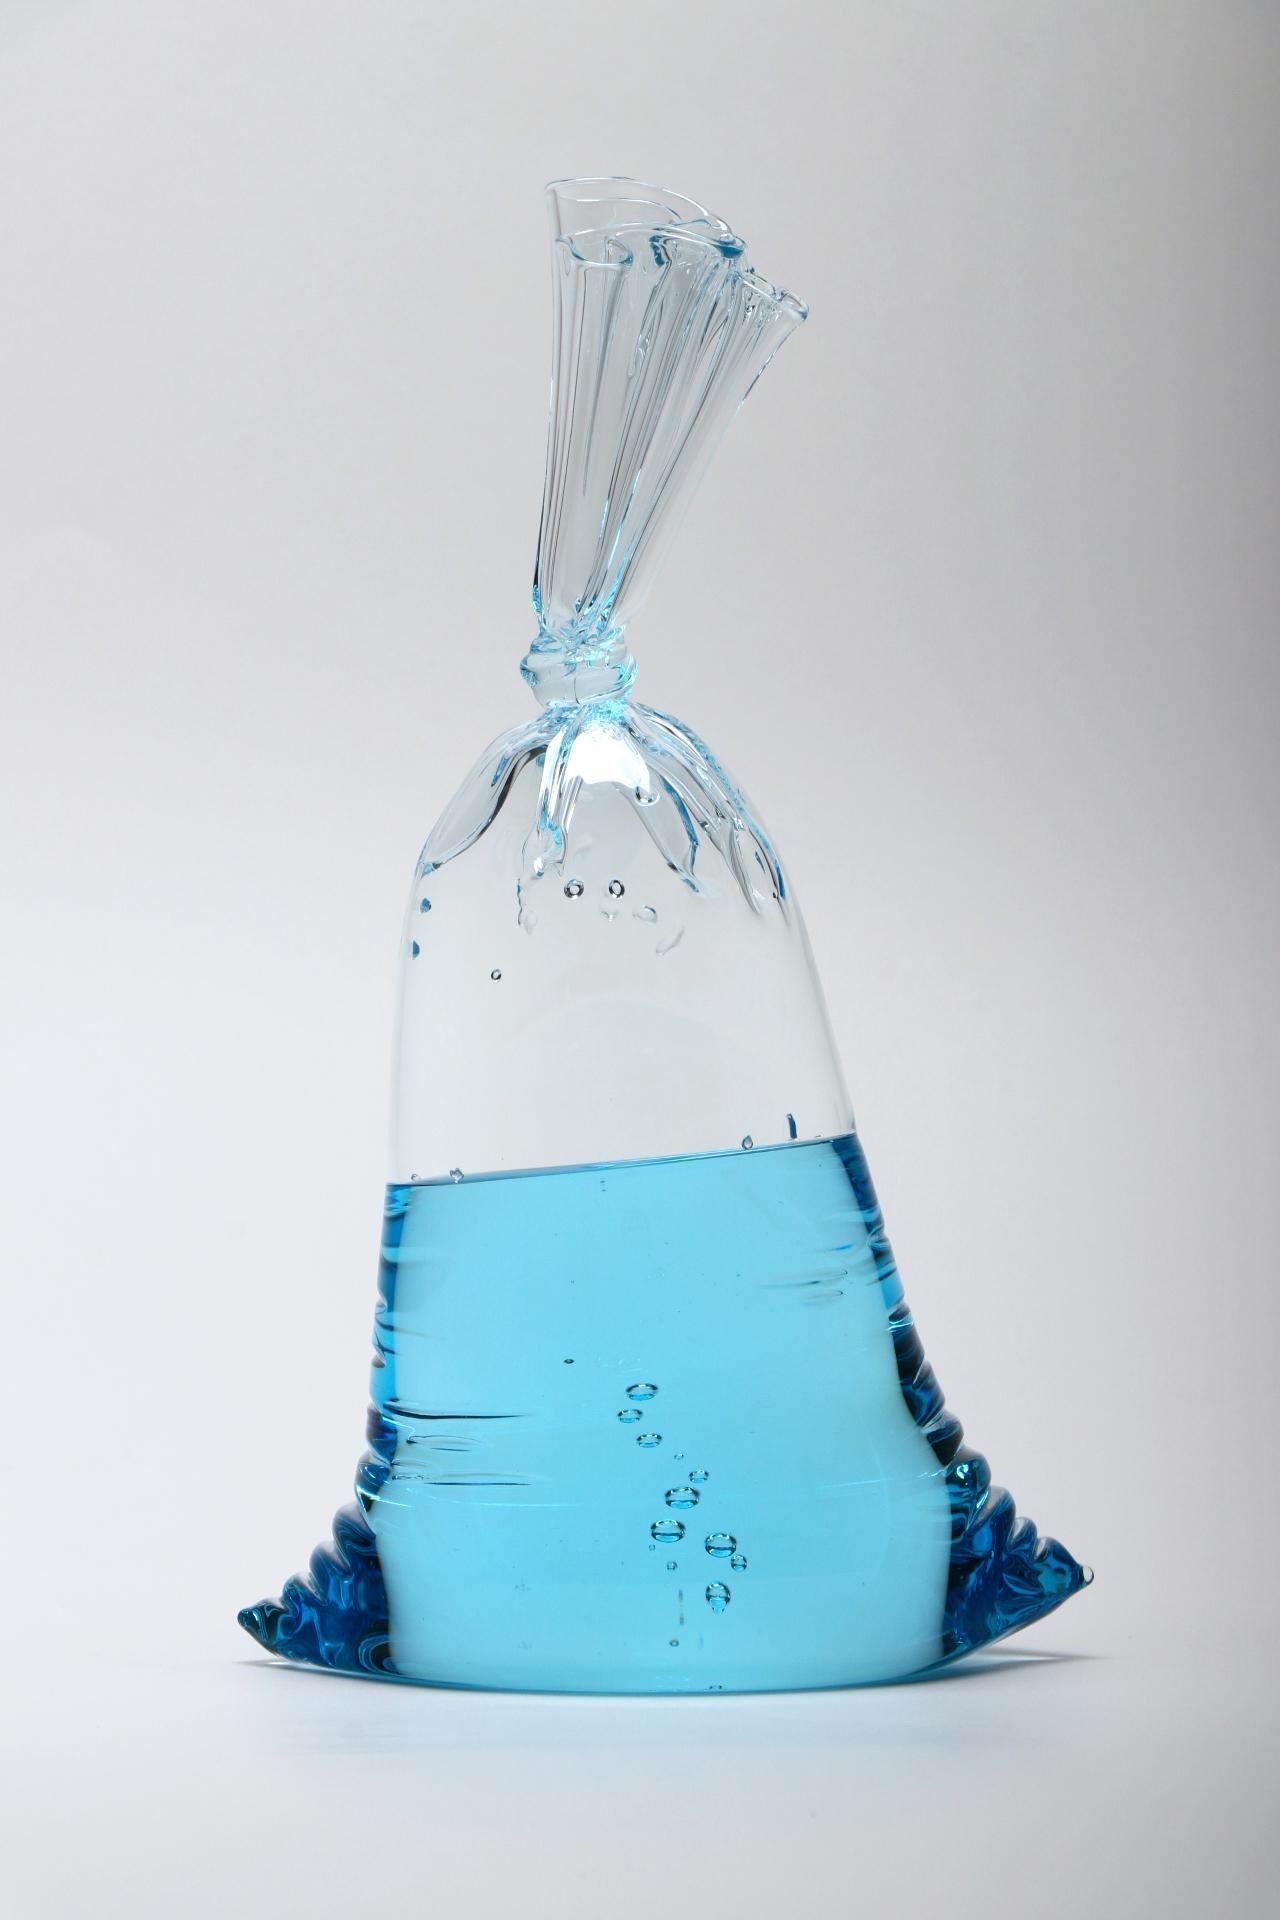 NEW RELEASE! Blue Series - Hyperreal small blue water bag glass sculpture, solid and hollow glass by Dylan Martinez. 

Size: 11.75 x 7 x 4.5 inches

Dylan Martinez' hyperreal sculptures are hot sculpted glass, hand molded entirely by the artist. The